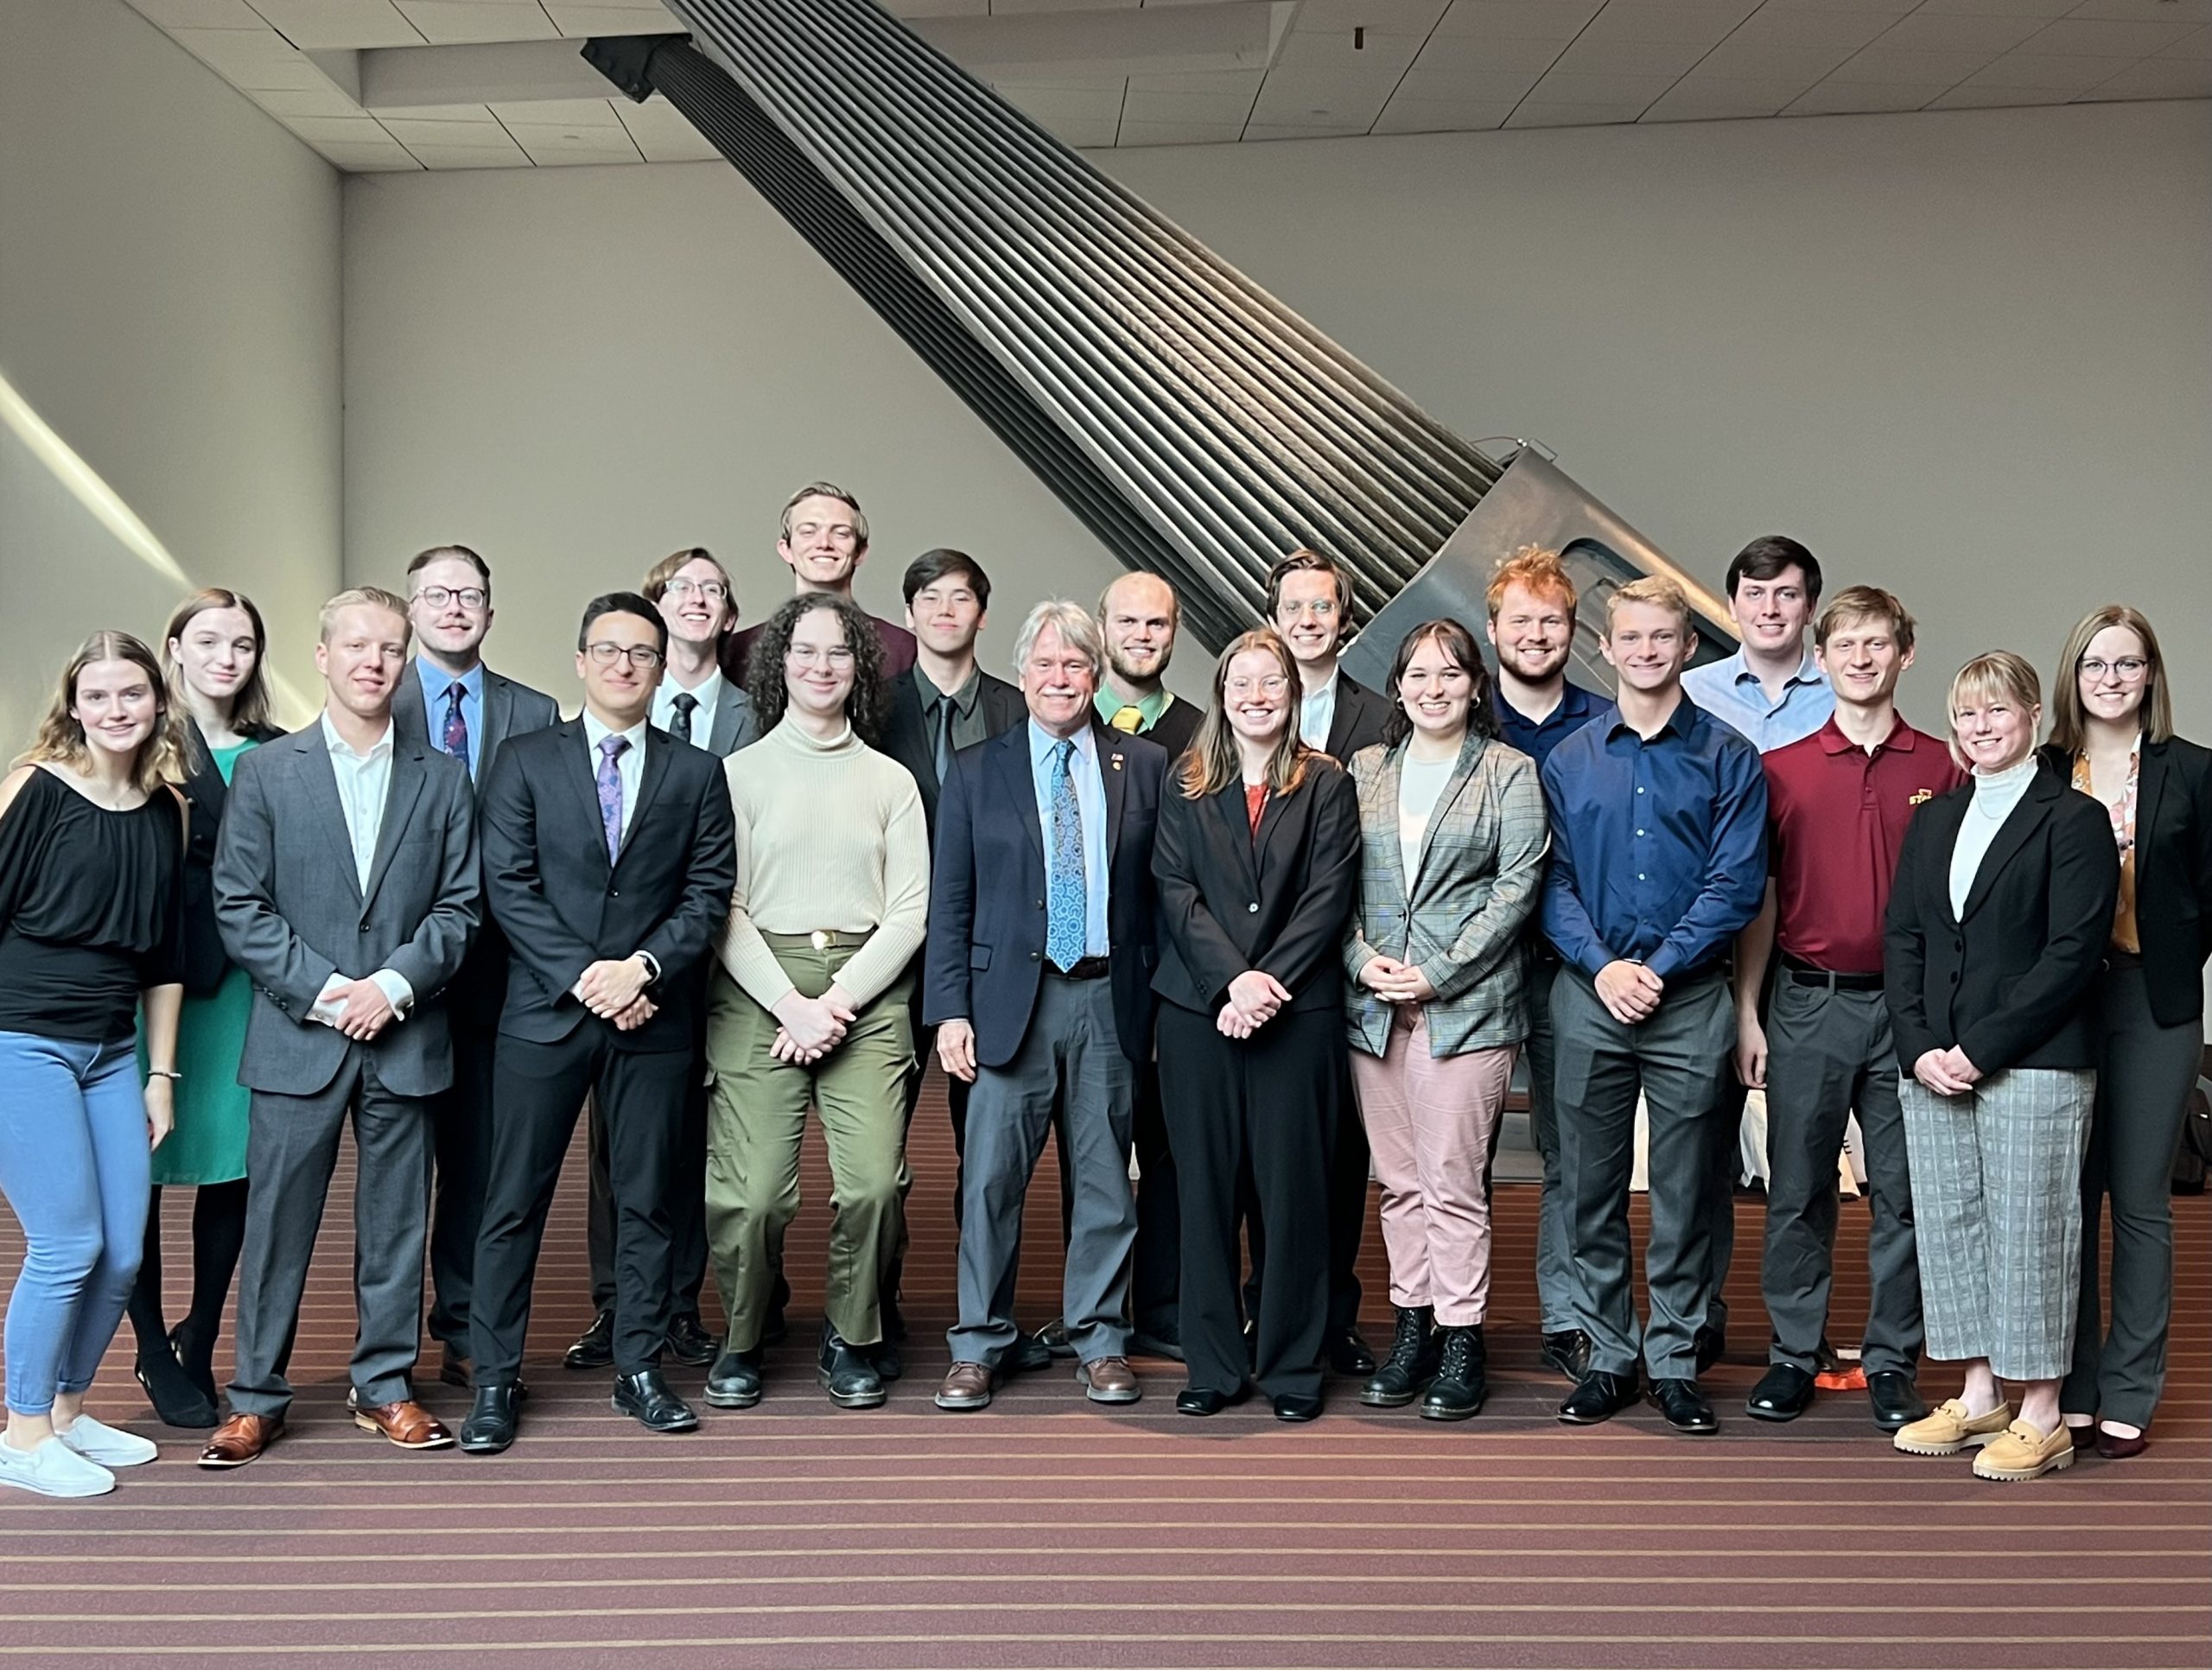 The ISU MA Chapter standing together in a group photo.